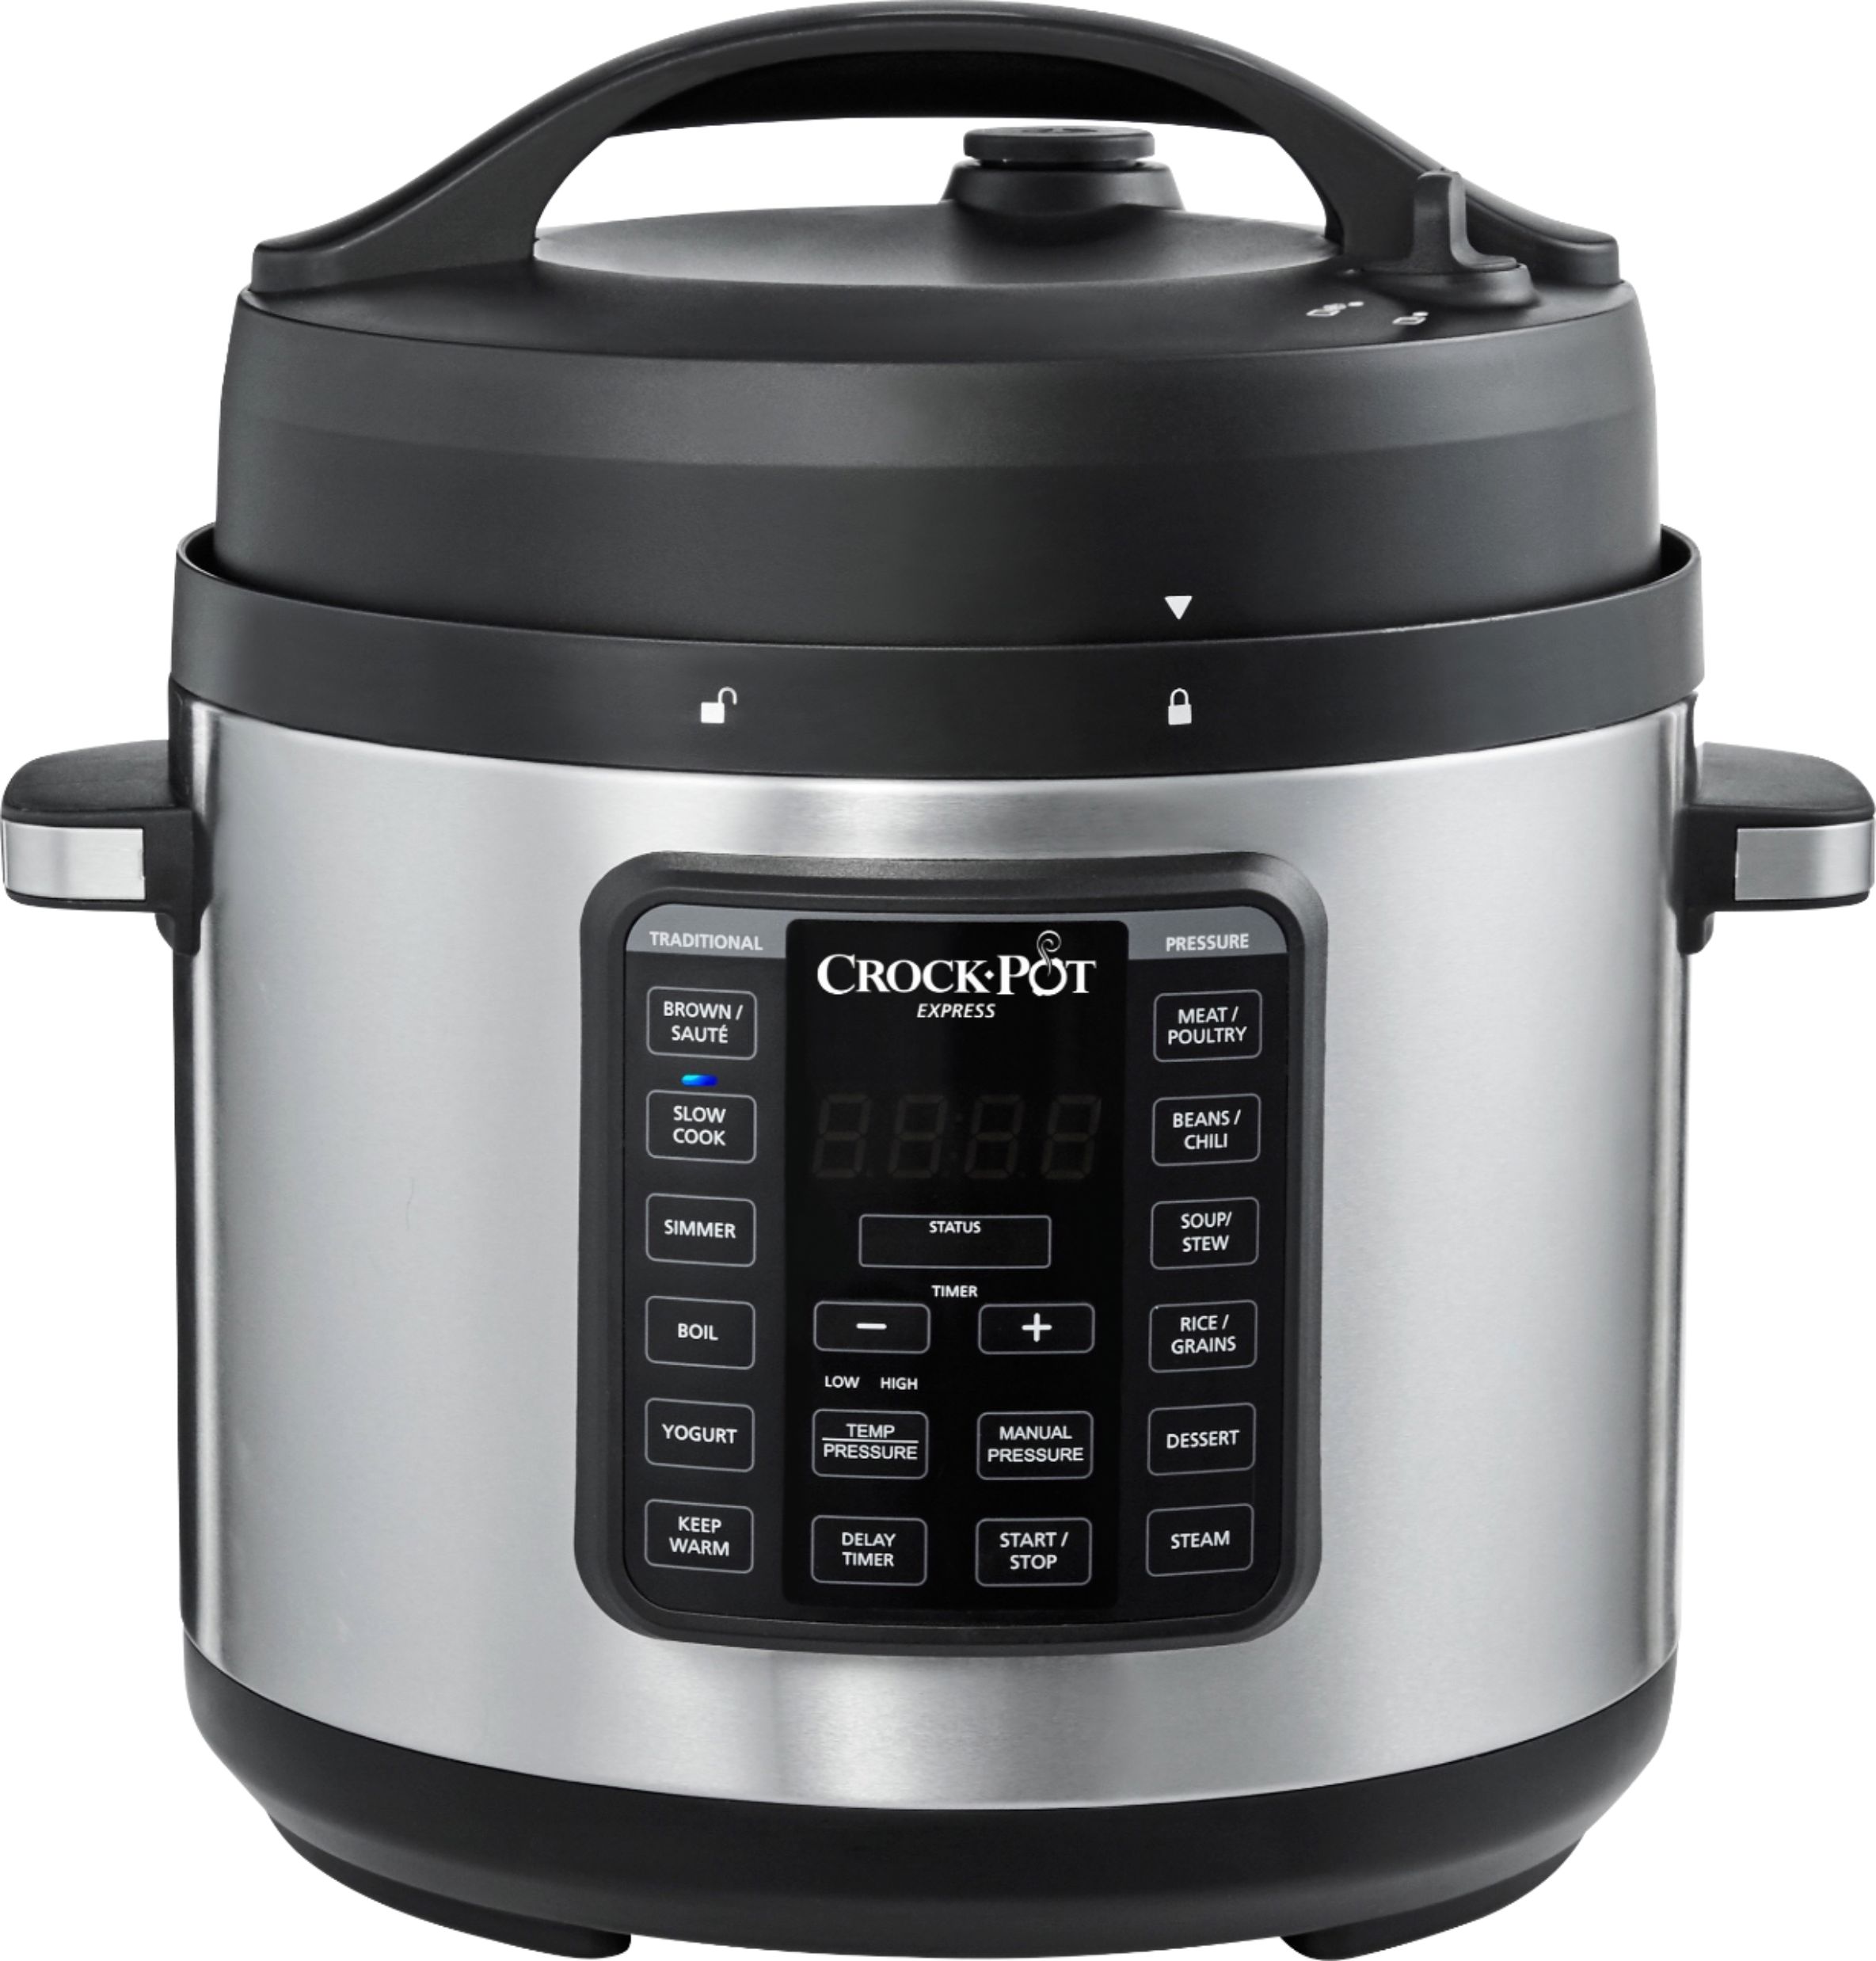 Crock-Pot - Express 6-Quart Easy Release Multi-Cooker - Stainless Steel *Now $39.99